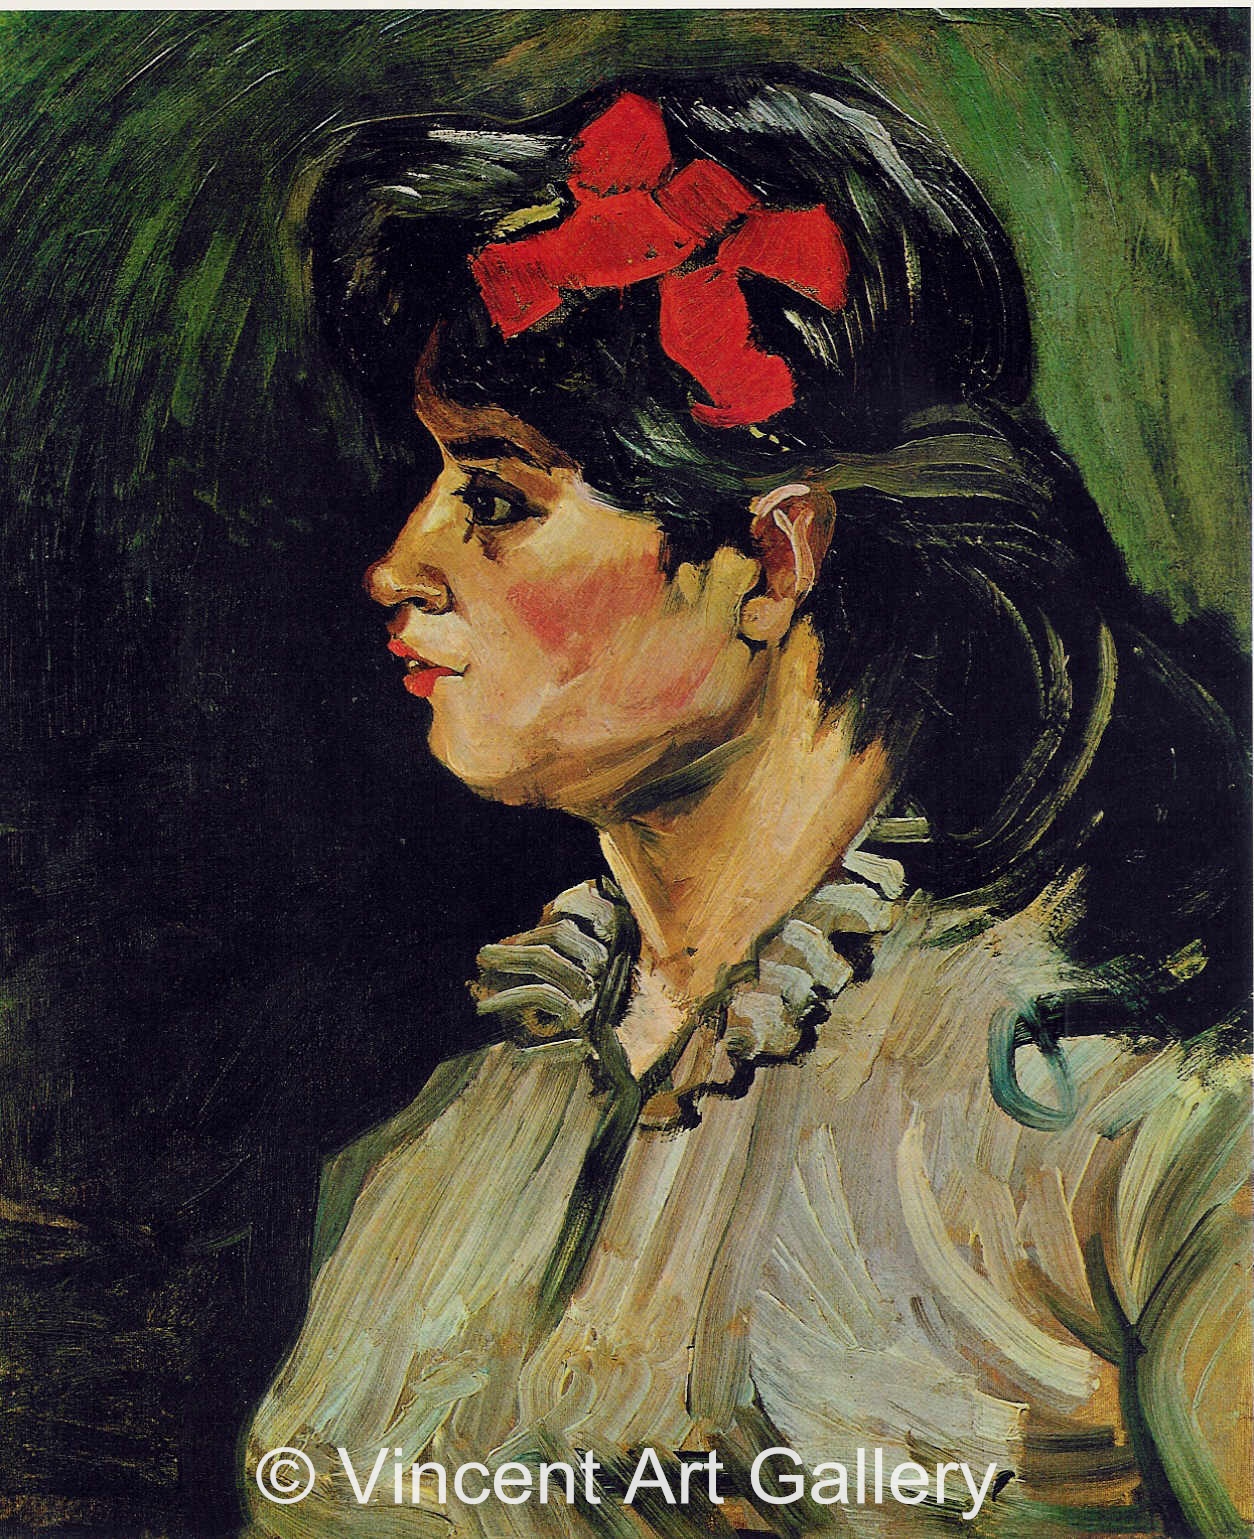 JH979, Portrait of a Woman with Red Ribbon